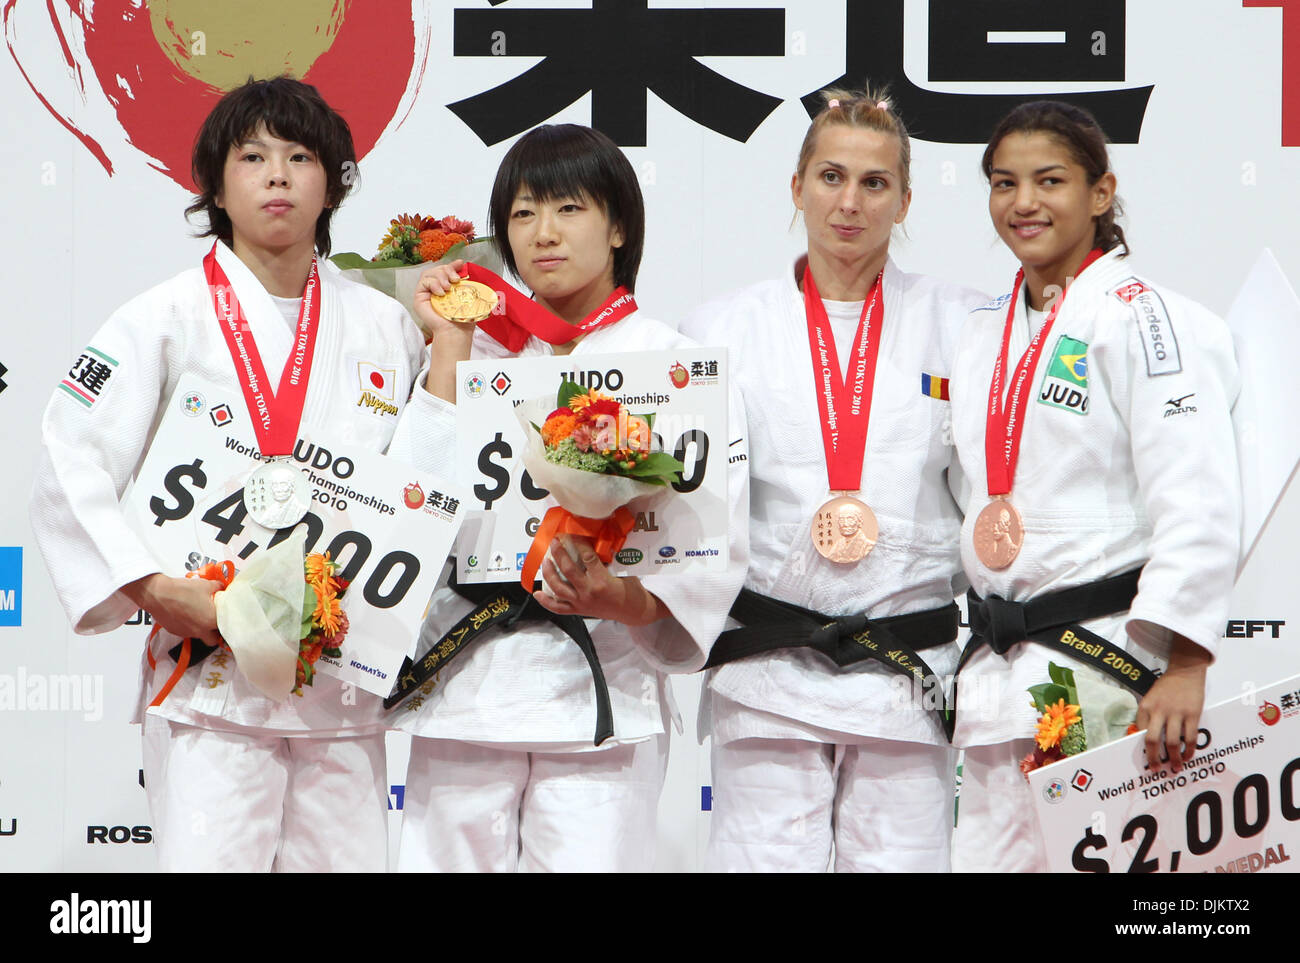 Sep 12, 2010 - Tokyo, Japan - (L to R) 2nd place winner TOMOKO FUKUMI of Japan, wommer HARUNA ASAMI of Japan and 3rd place winners ALINA DUMITRU of Romania and SARAH MENEZES of Brazil pose with medals after competing in the Men -66kg fduring the World Judo Championships Tokyo 2010 at the Yoyogi National Gymnasium in Tokyo, Japan. (Credit Image: © Junko Kimura/Jana/ZUMApress.com) Stock Photo